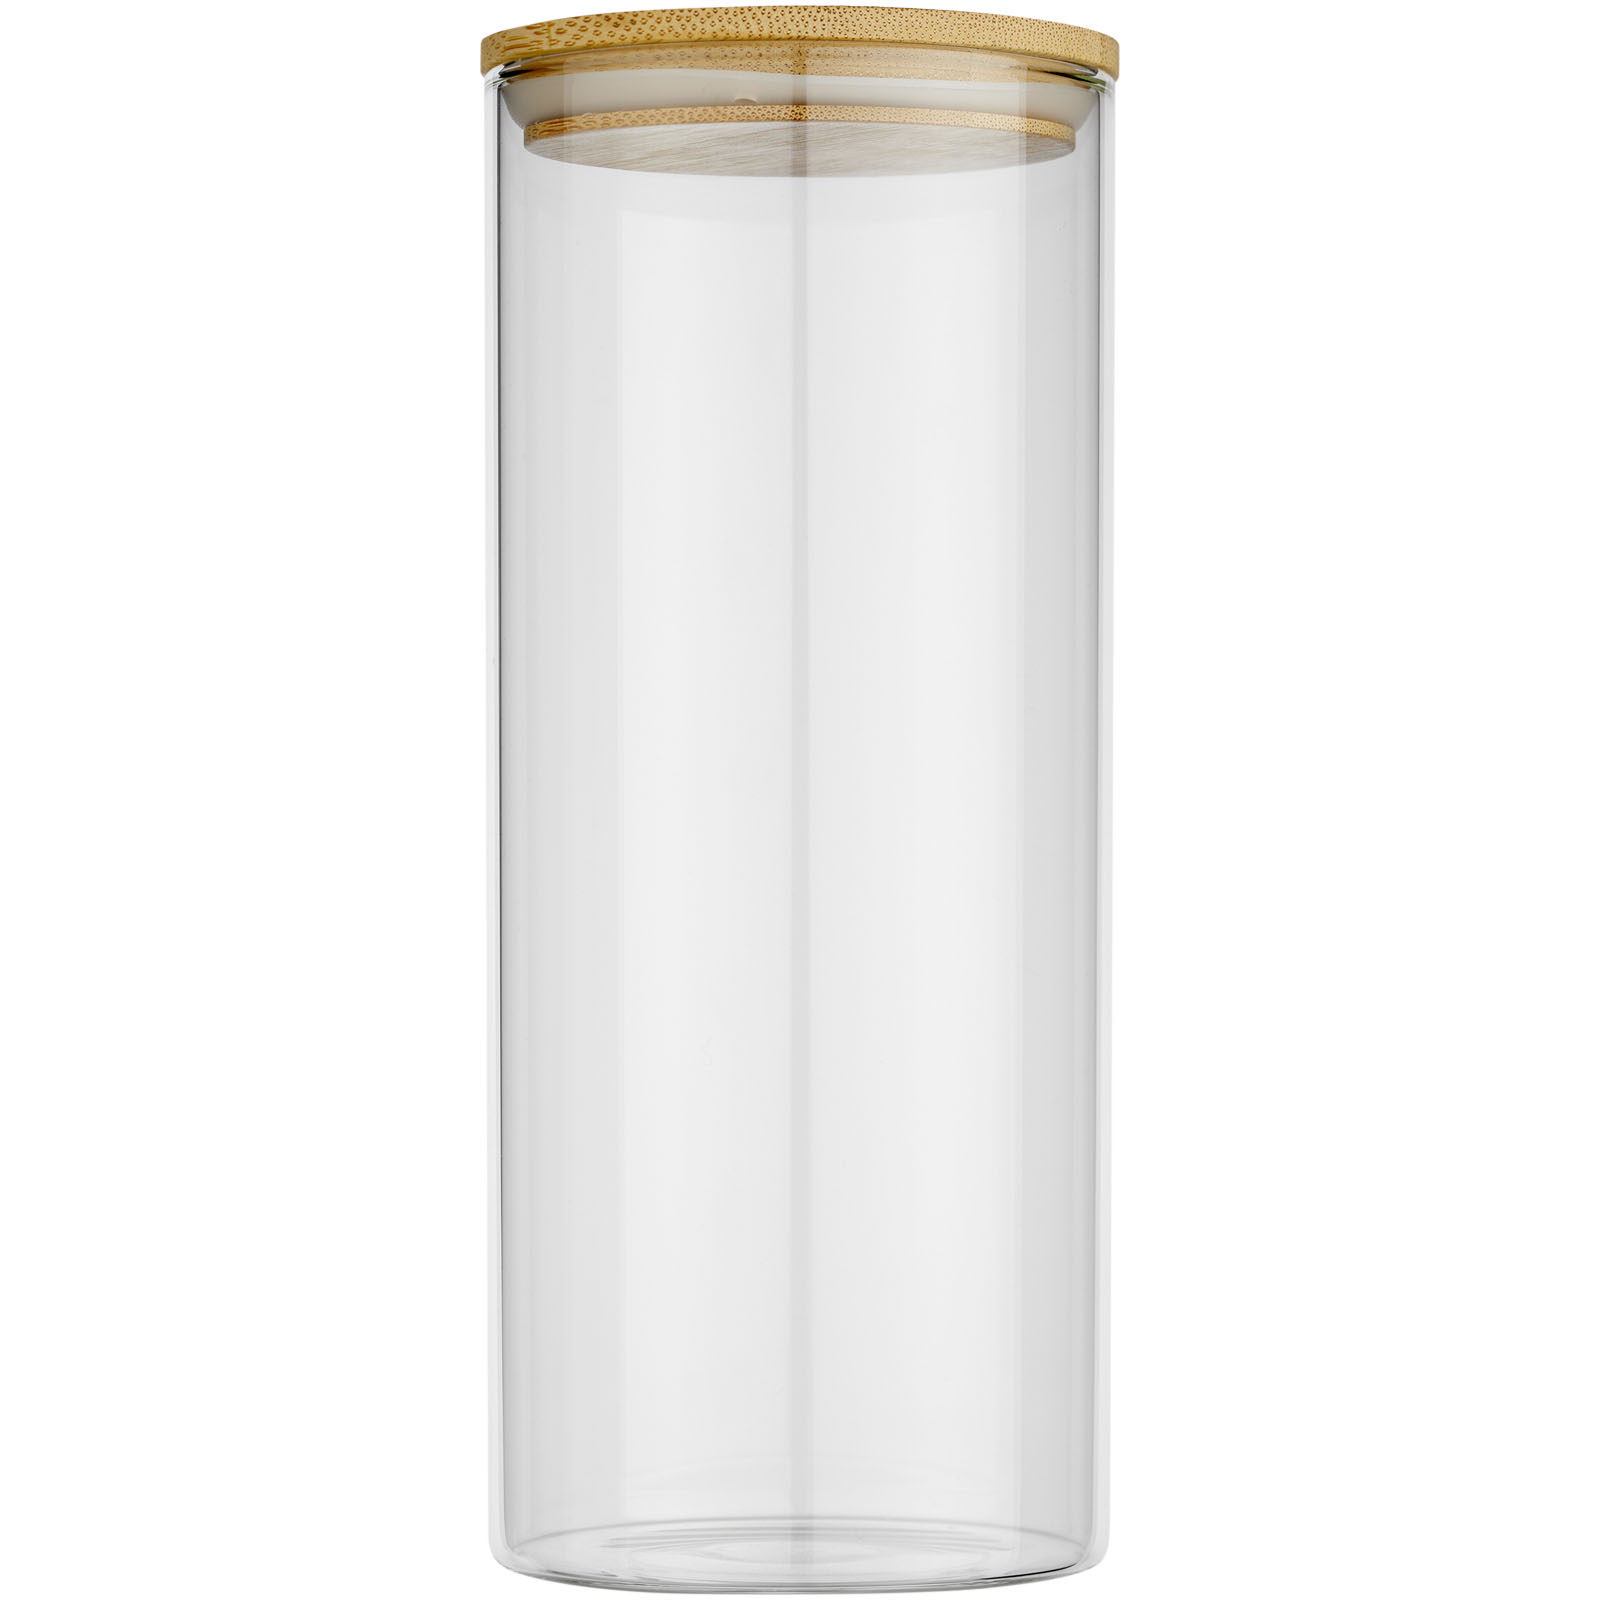 Advertising Kitchenware - Boley 940 ml glass food container - 3